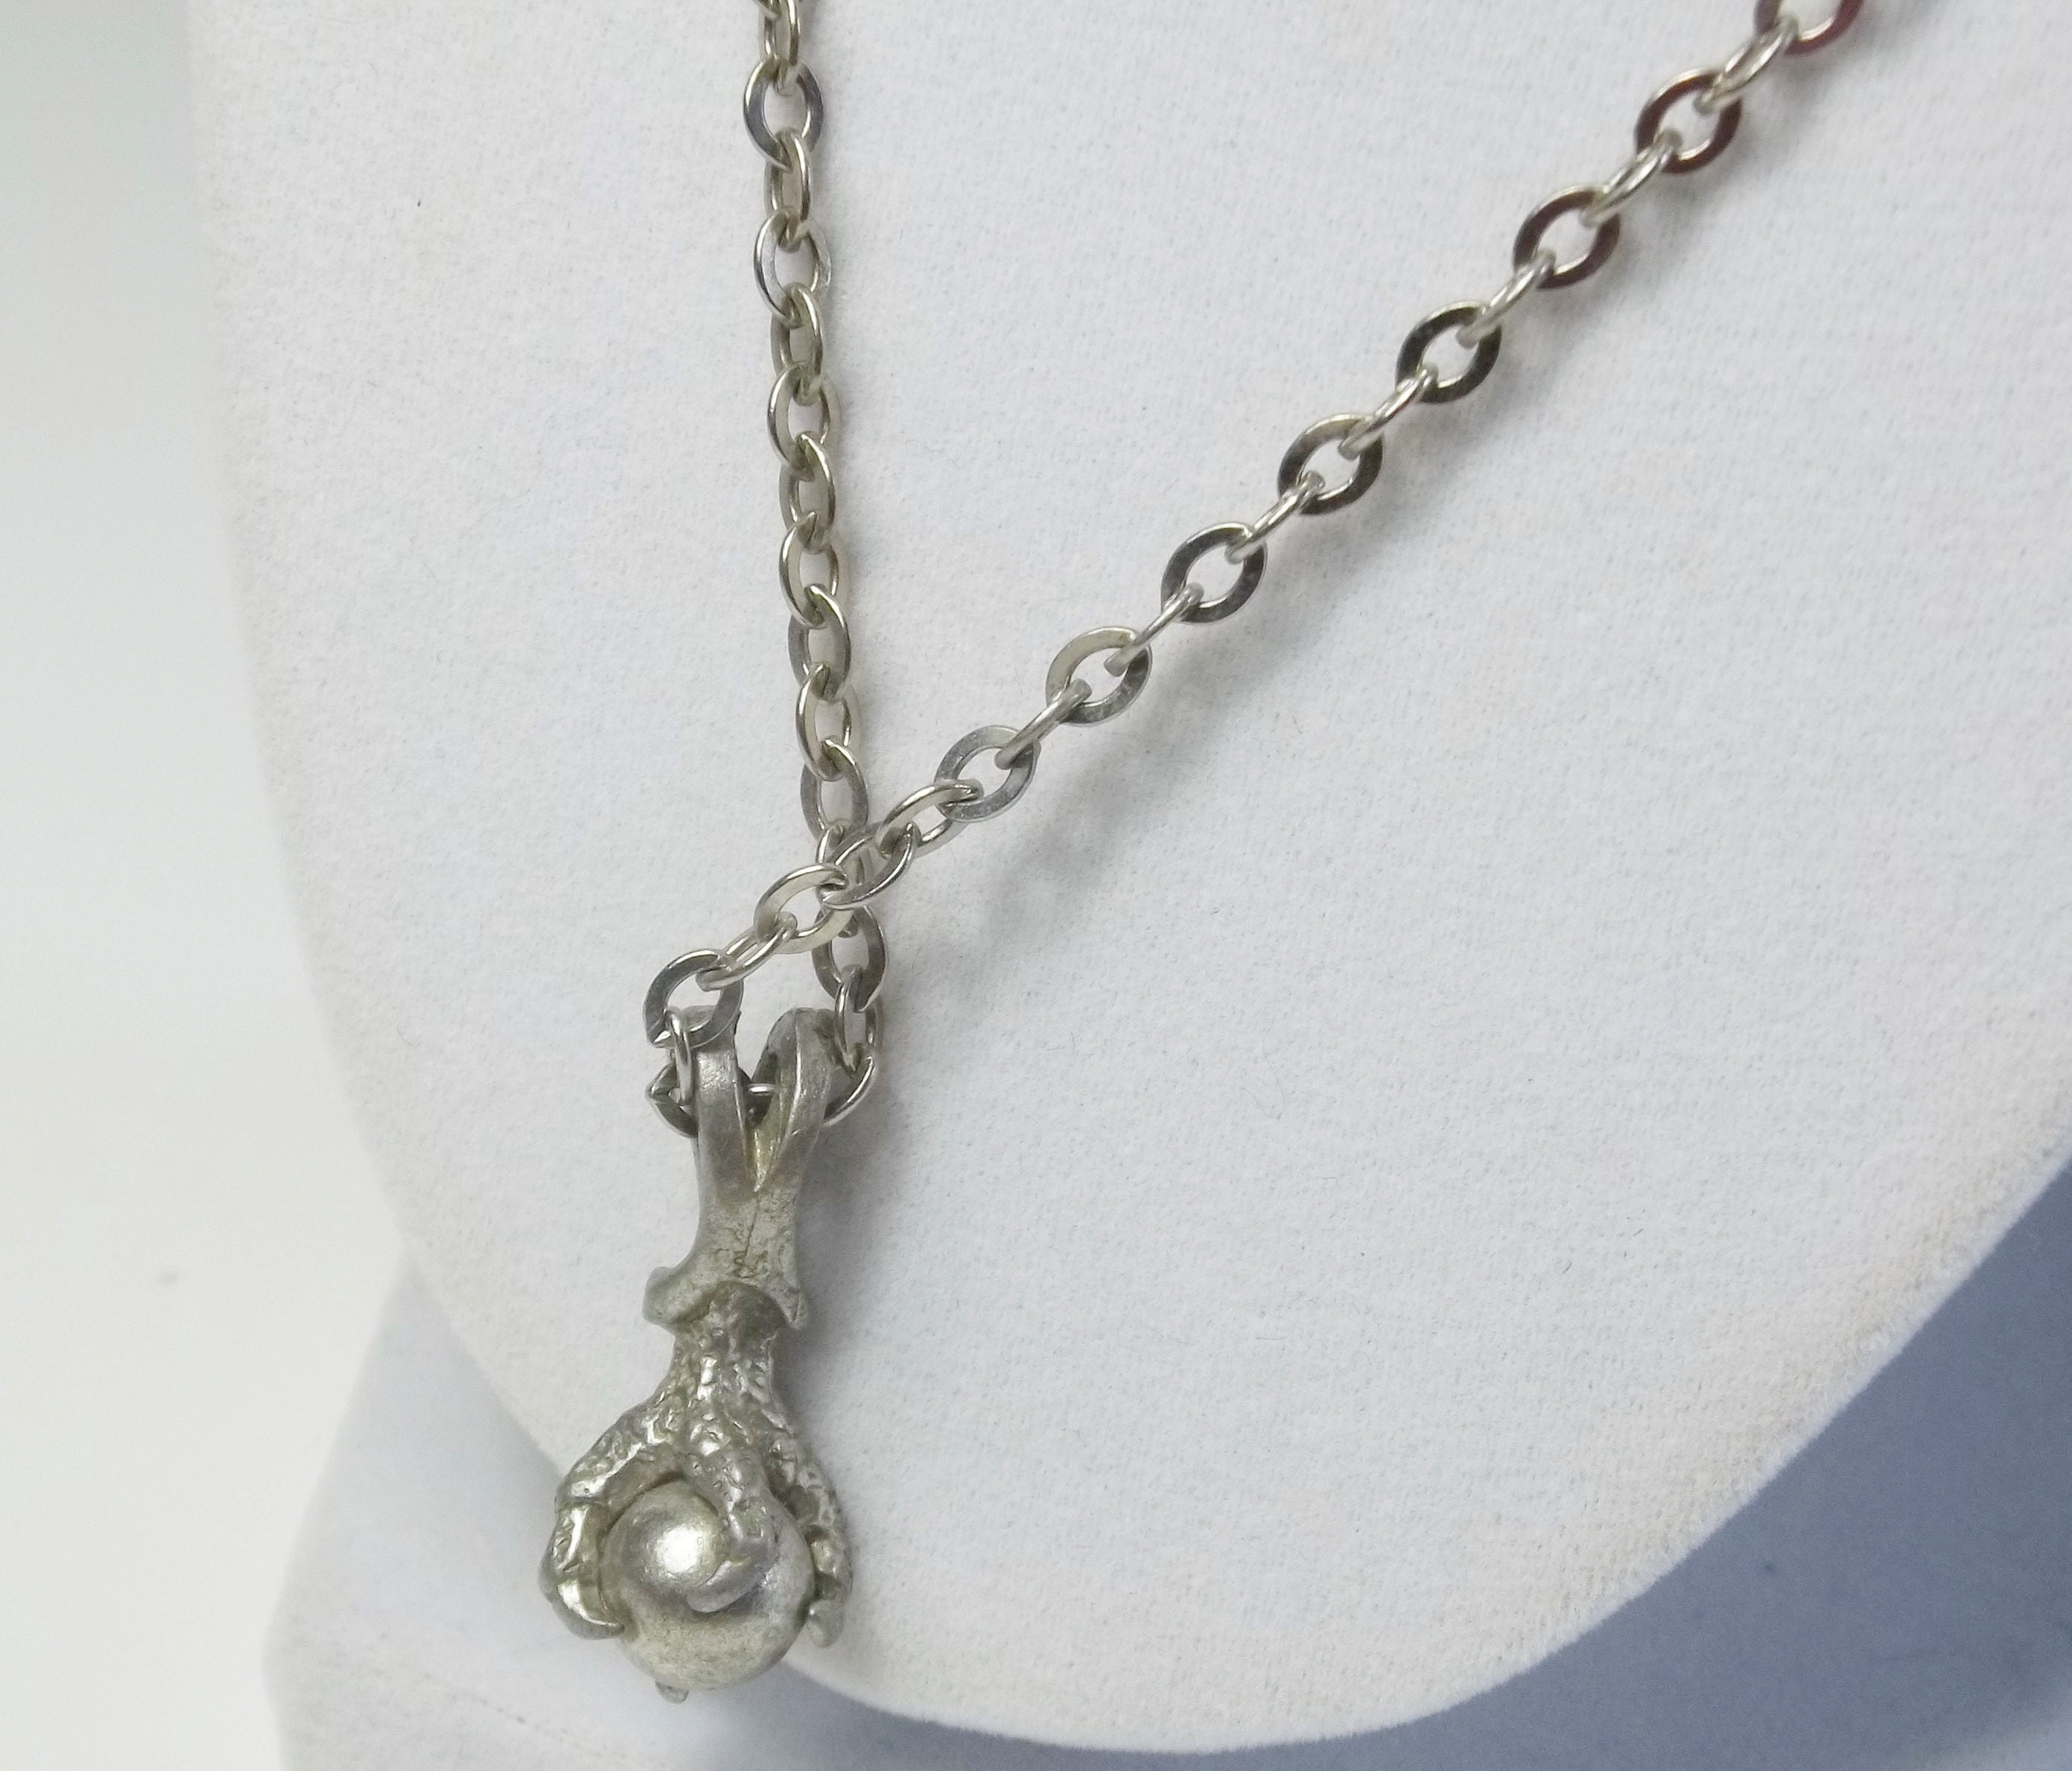 Costume Jewelry Silver & Pewter 1960's Claw And Ball Pendant Vintage Necklace Gift For Her Or Him on Etsy